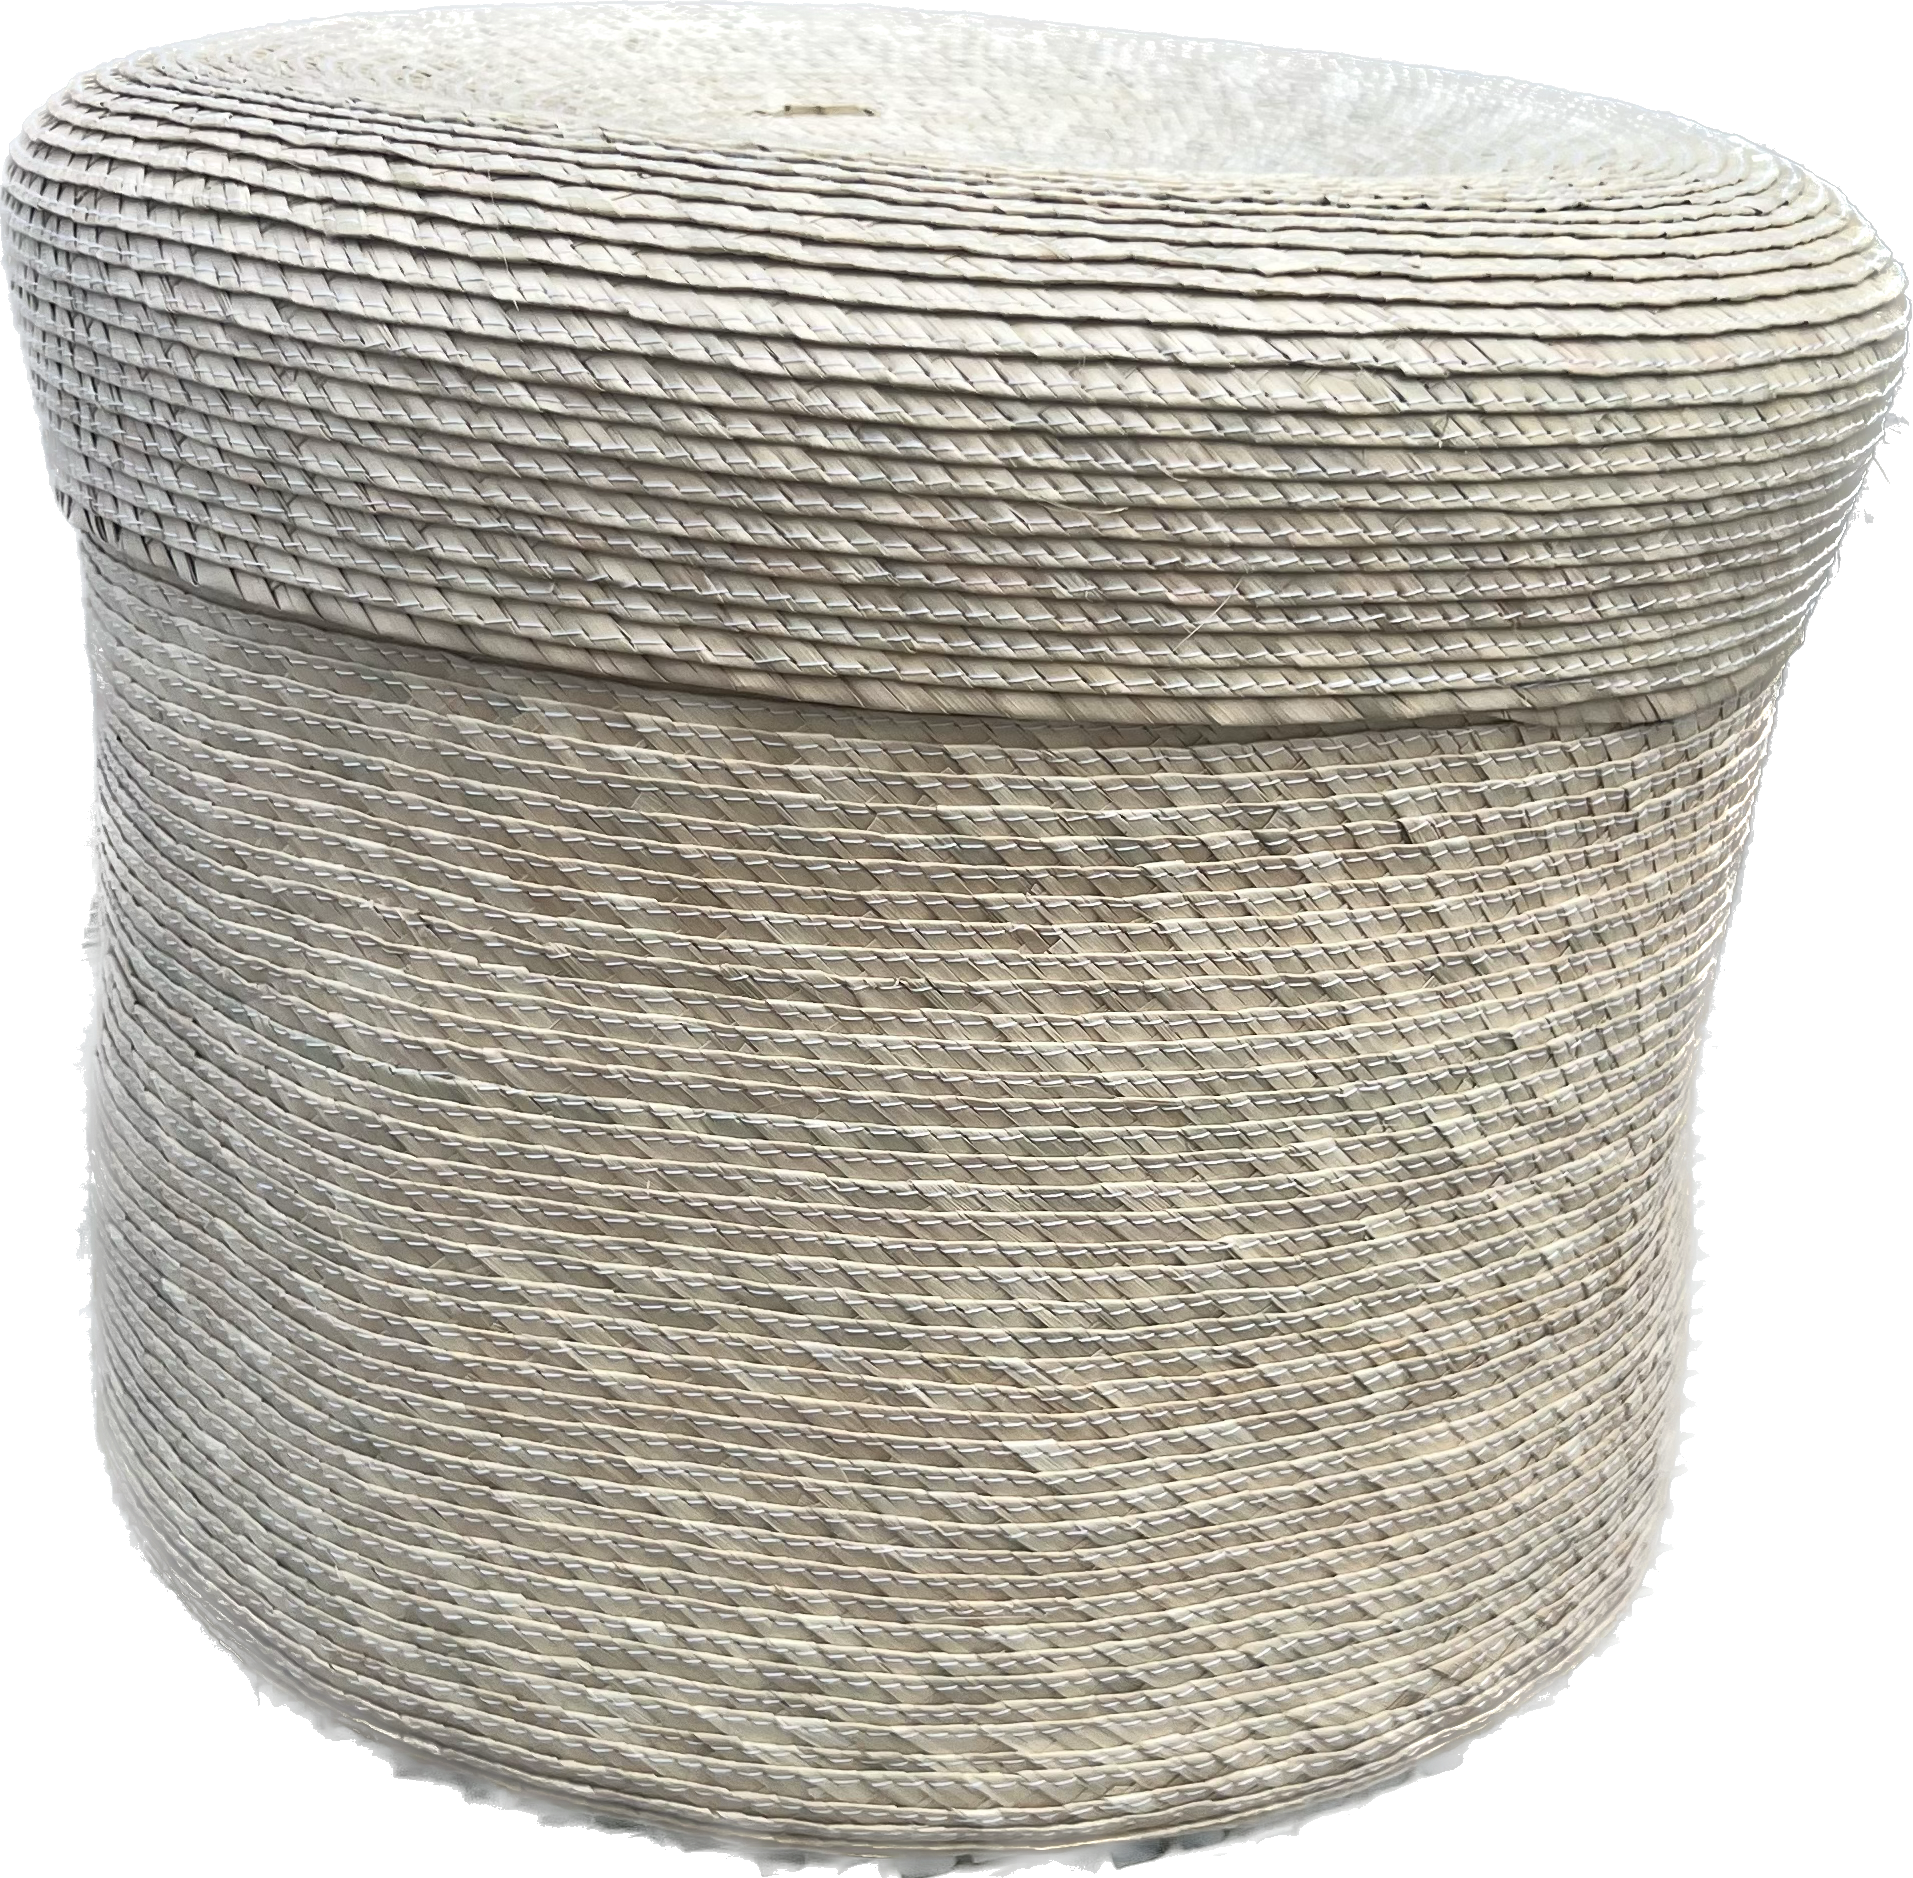 Whicker Basket with Lid